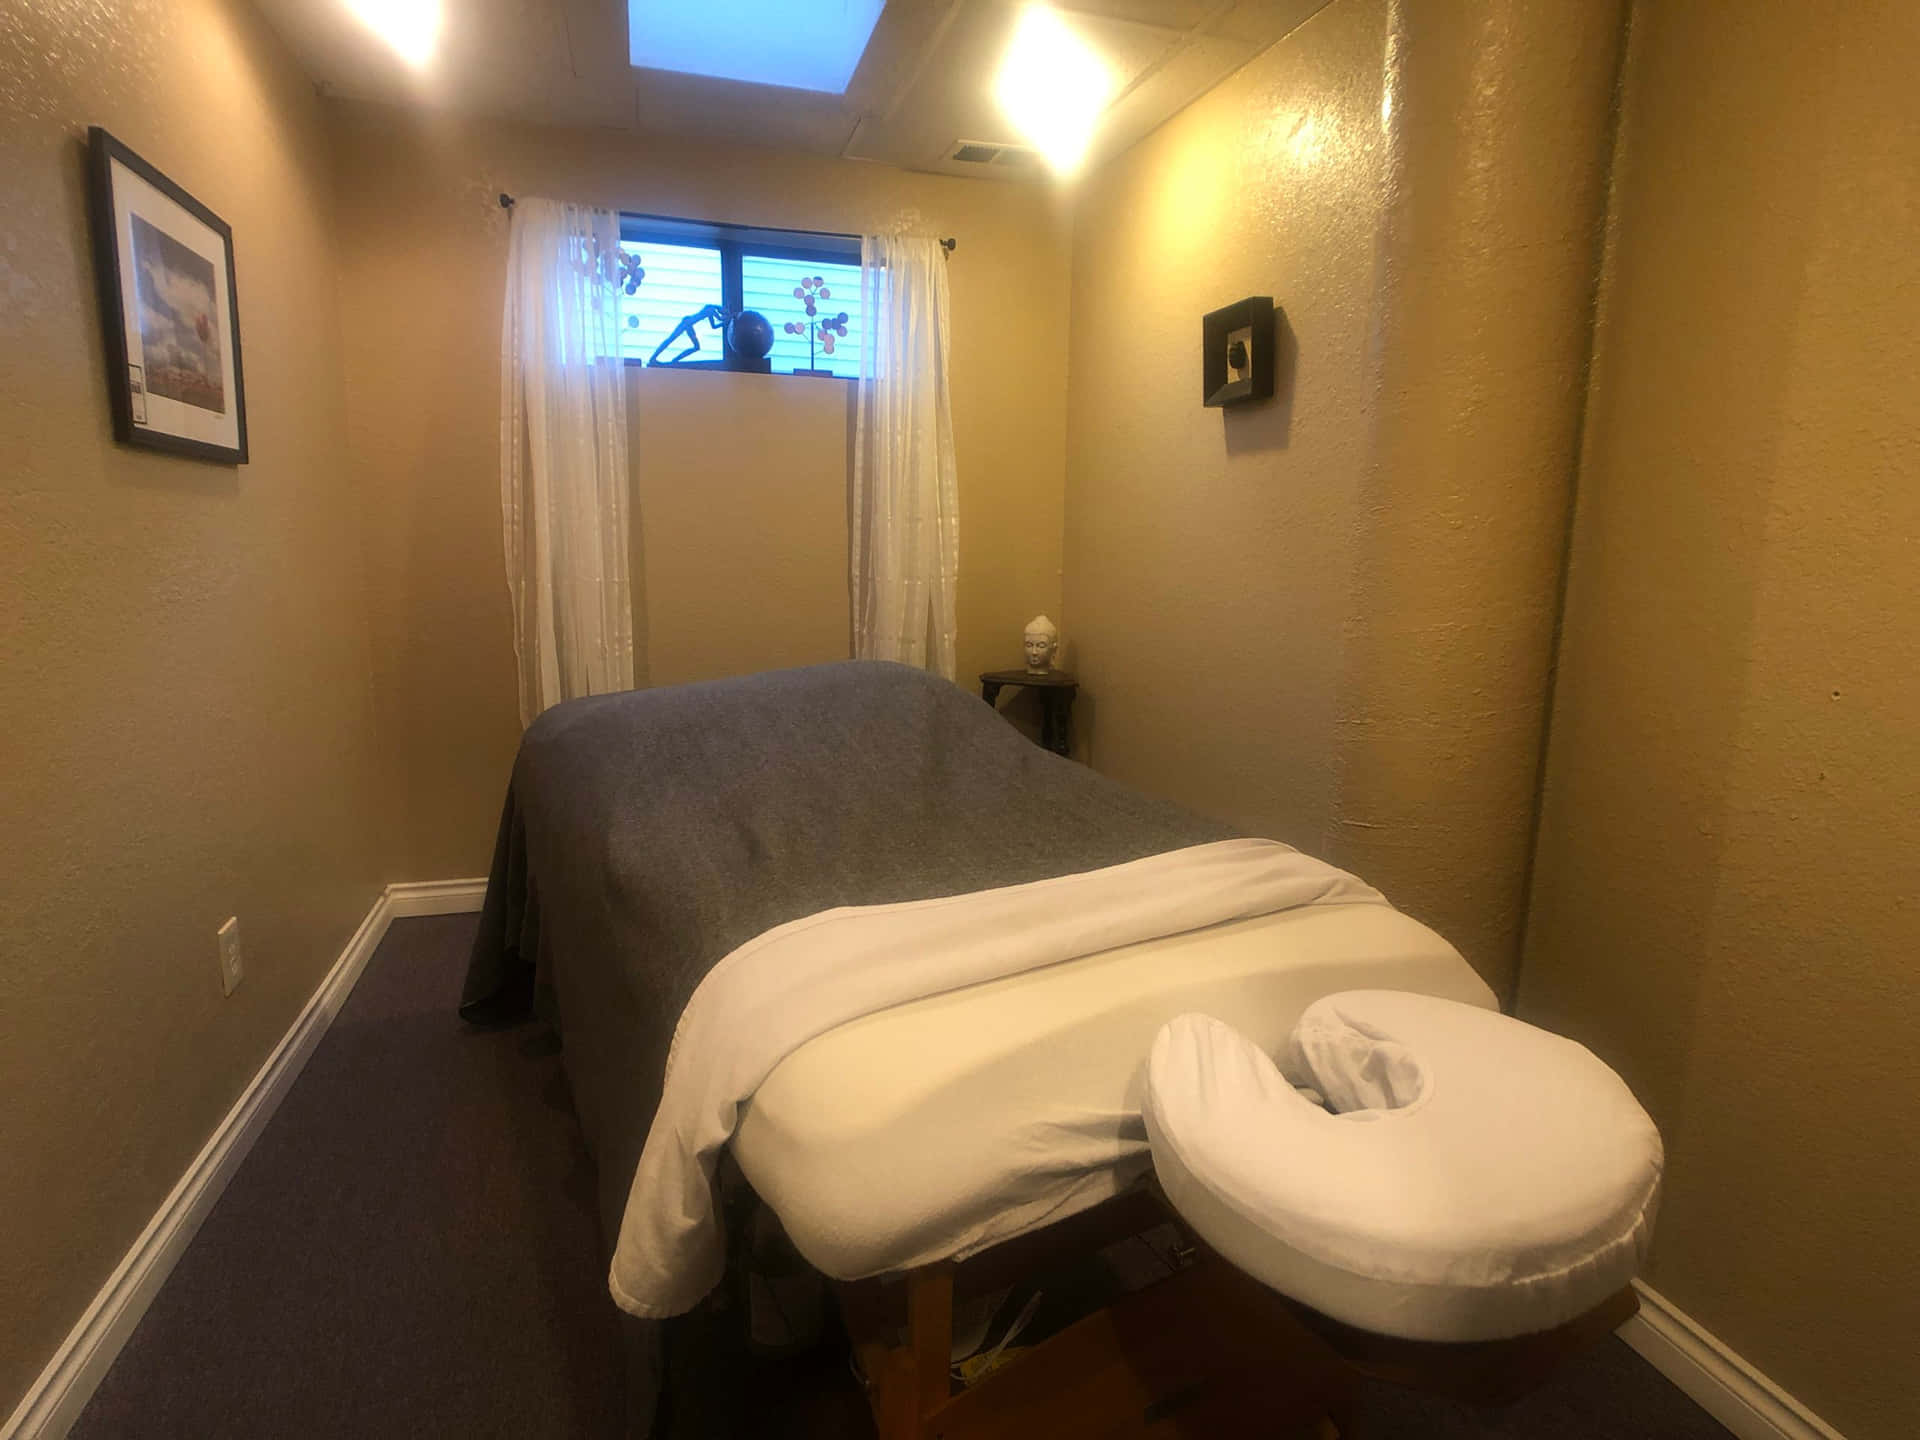 A Room With A Massage Table And A Window